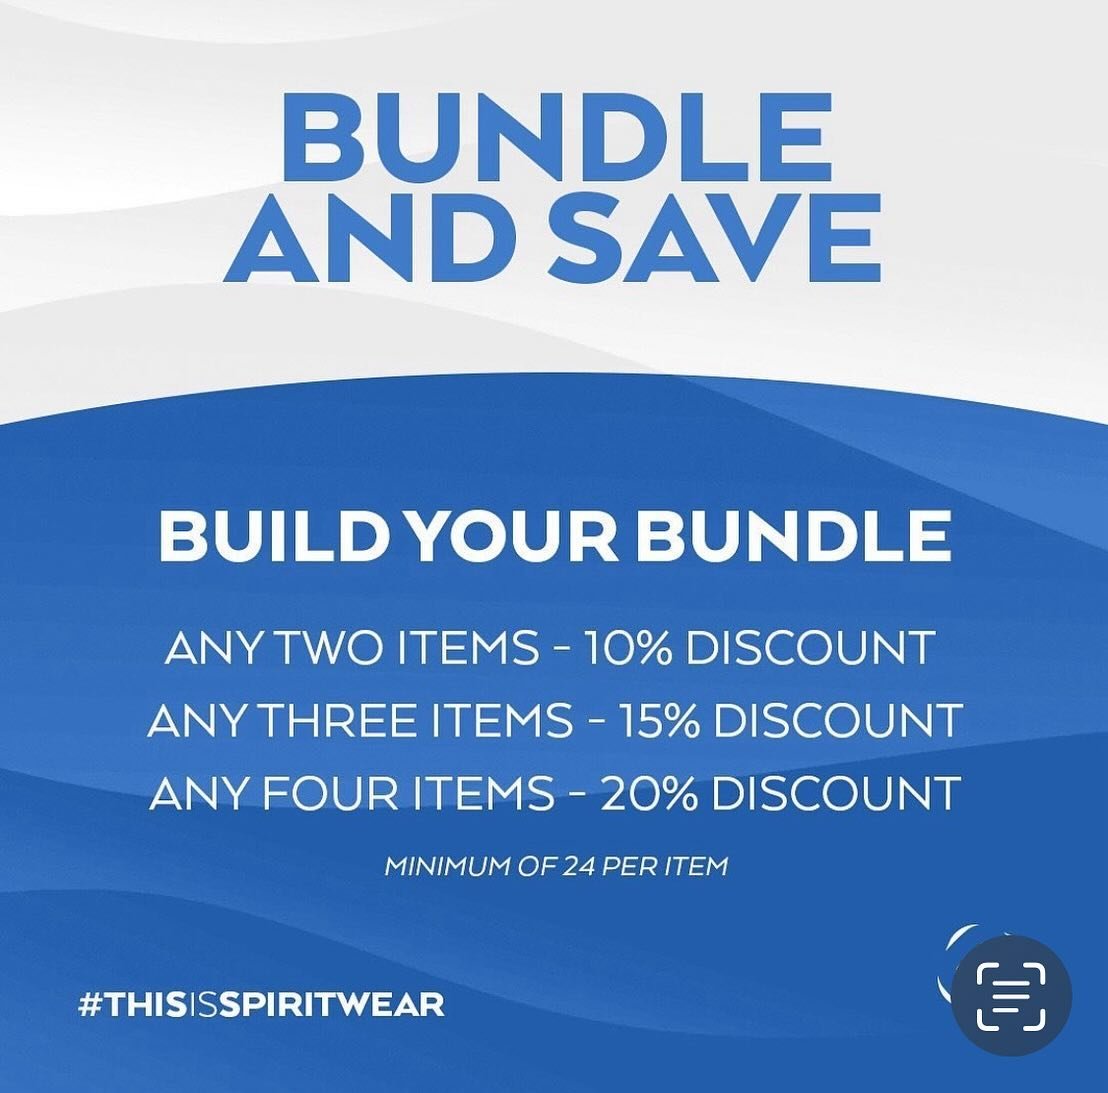 BUNDLE AND SAVE!
Build Your Own Packages. 
The More You Buy, The More You Save!
Mix &amp; Match Any Items!

Choose to be INNOVATIVE this season. Send us a message at http://innovativespiritwear.com/contact for more information and to get your New Sea